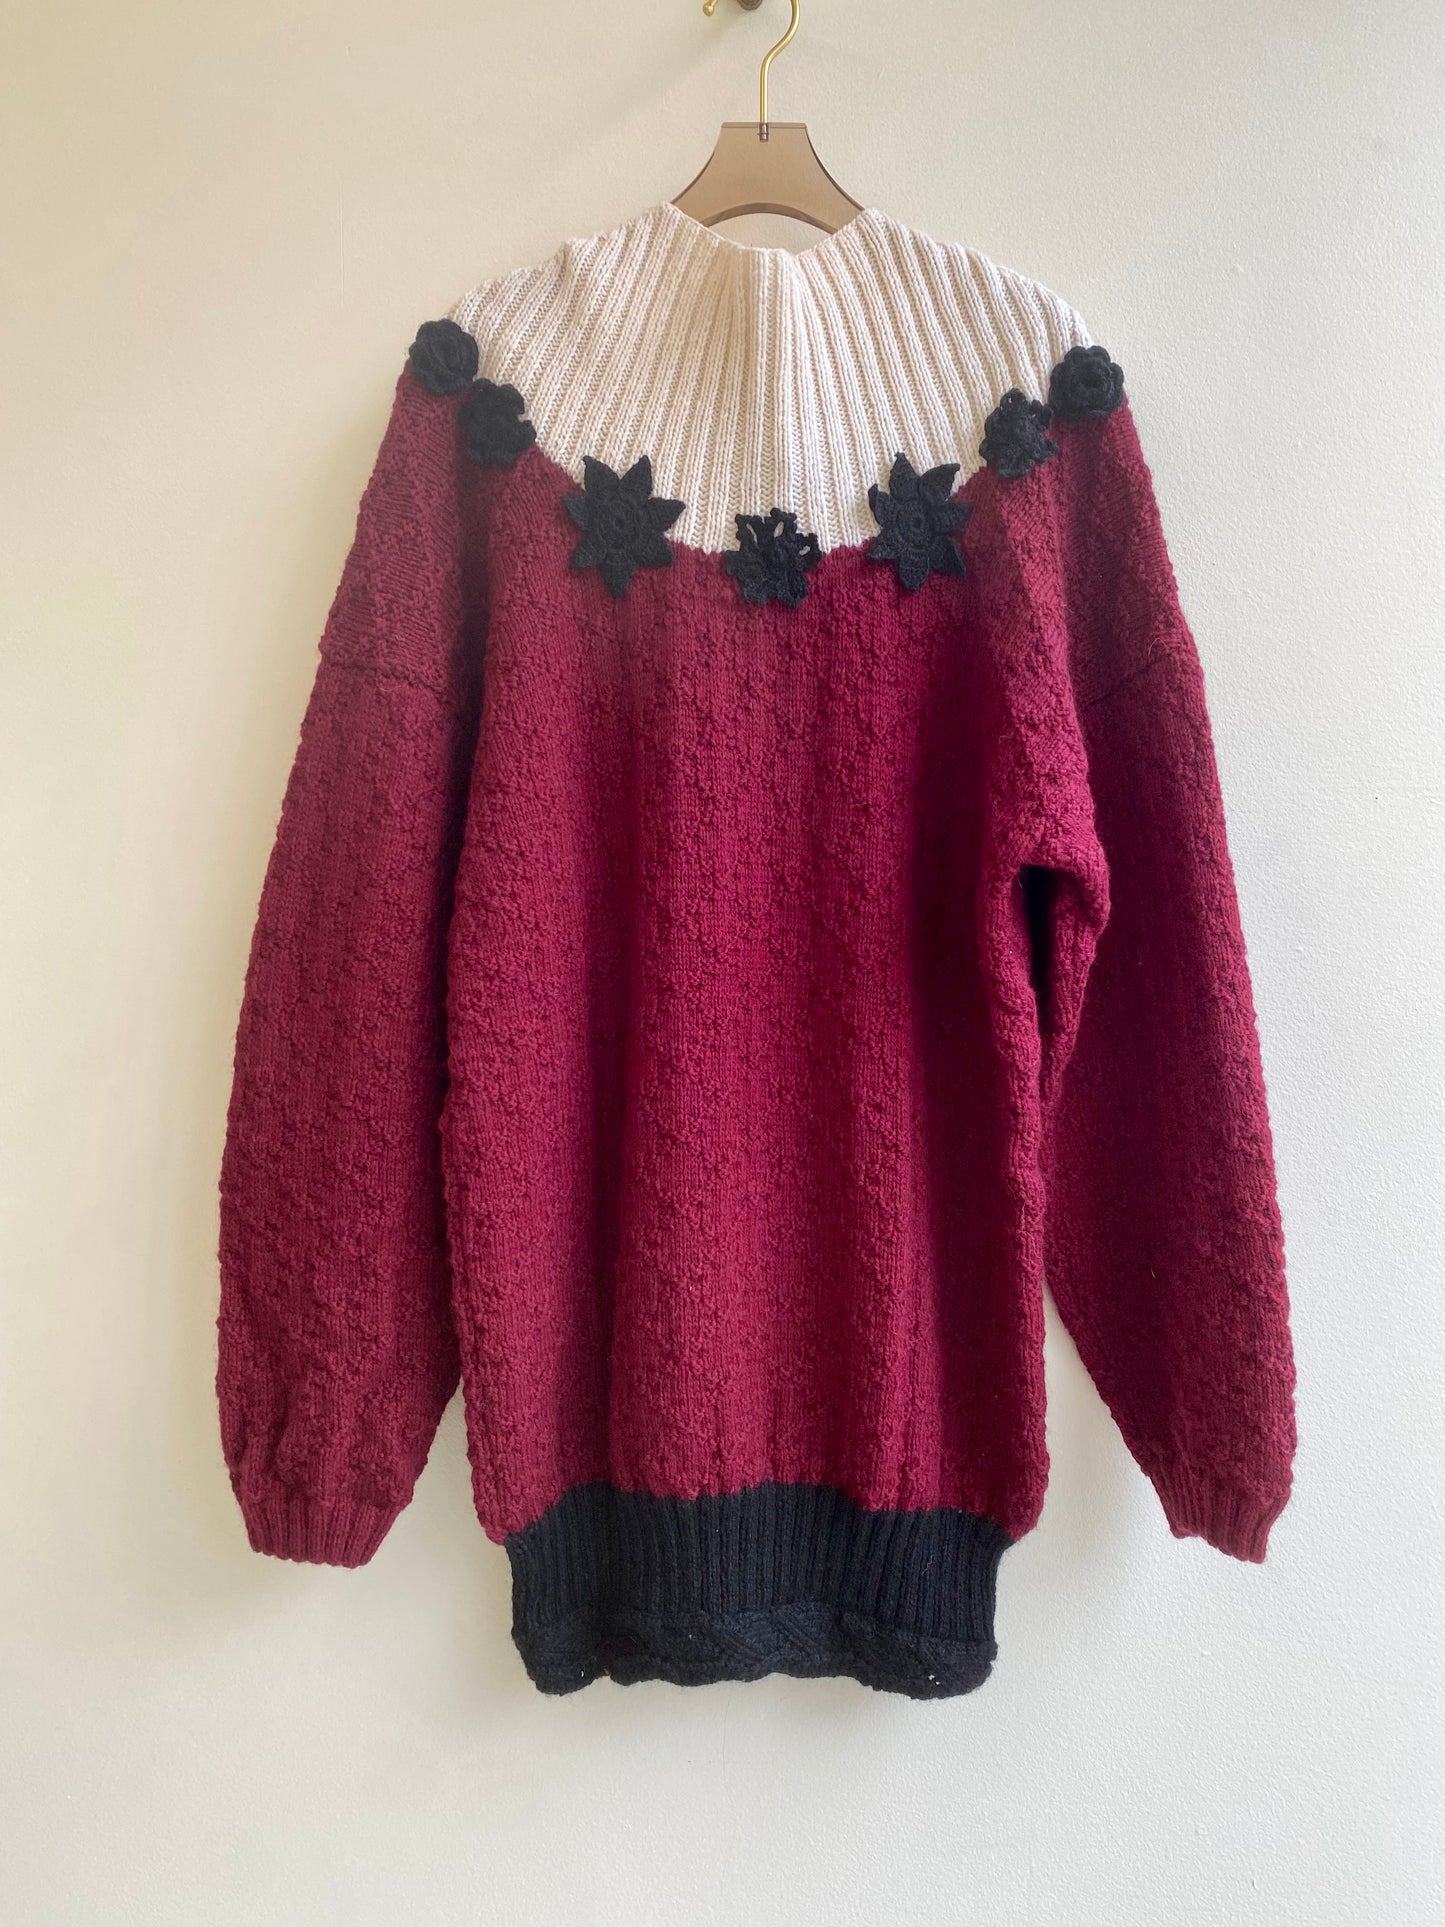 Hand-Knit Wool Sweater by Cattavelli